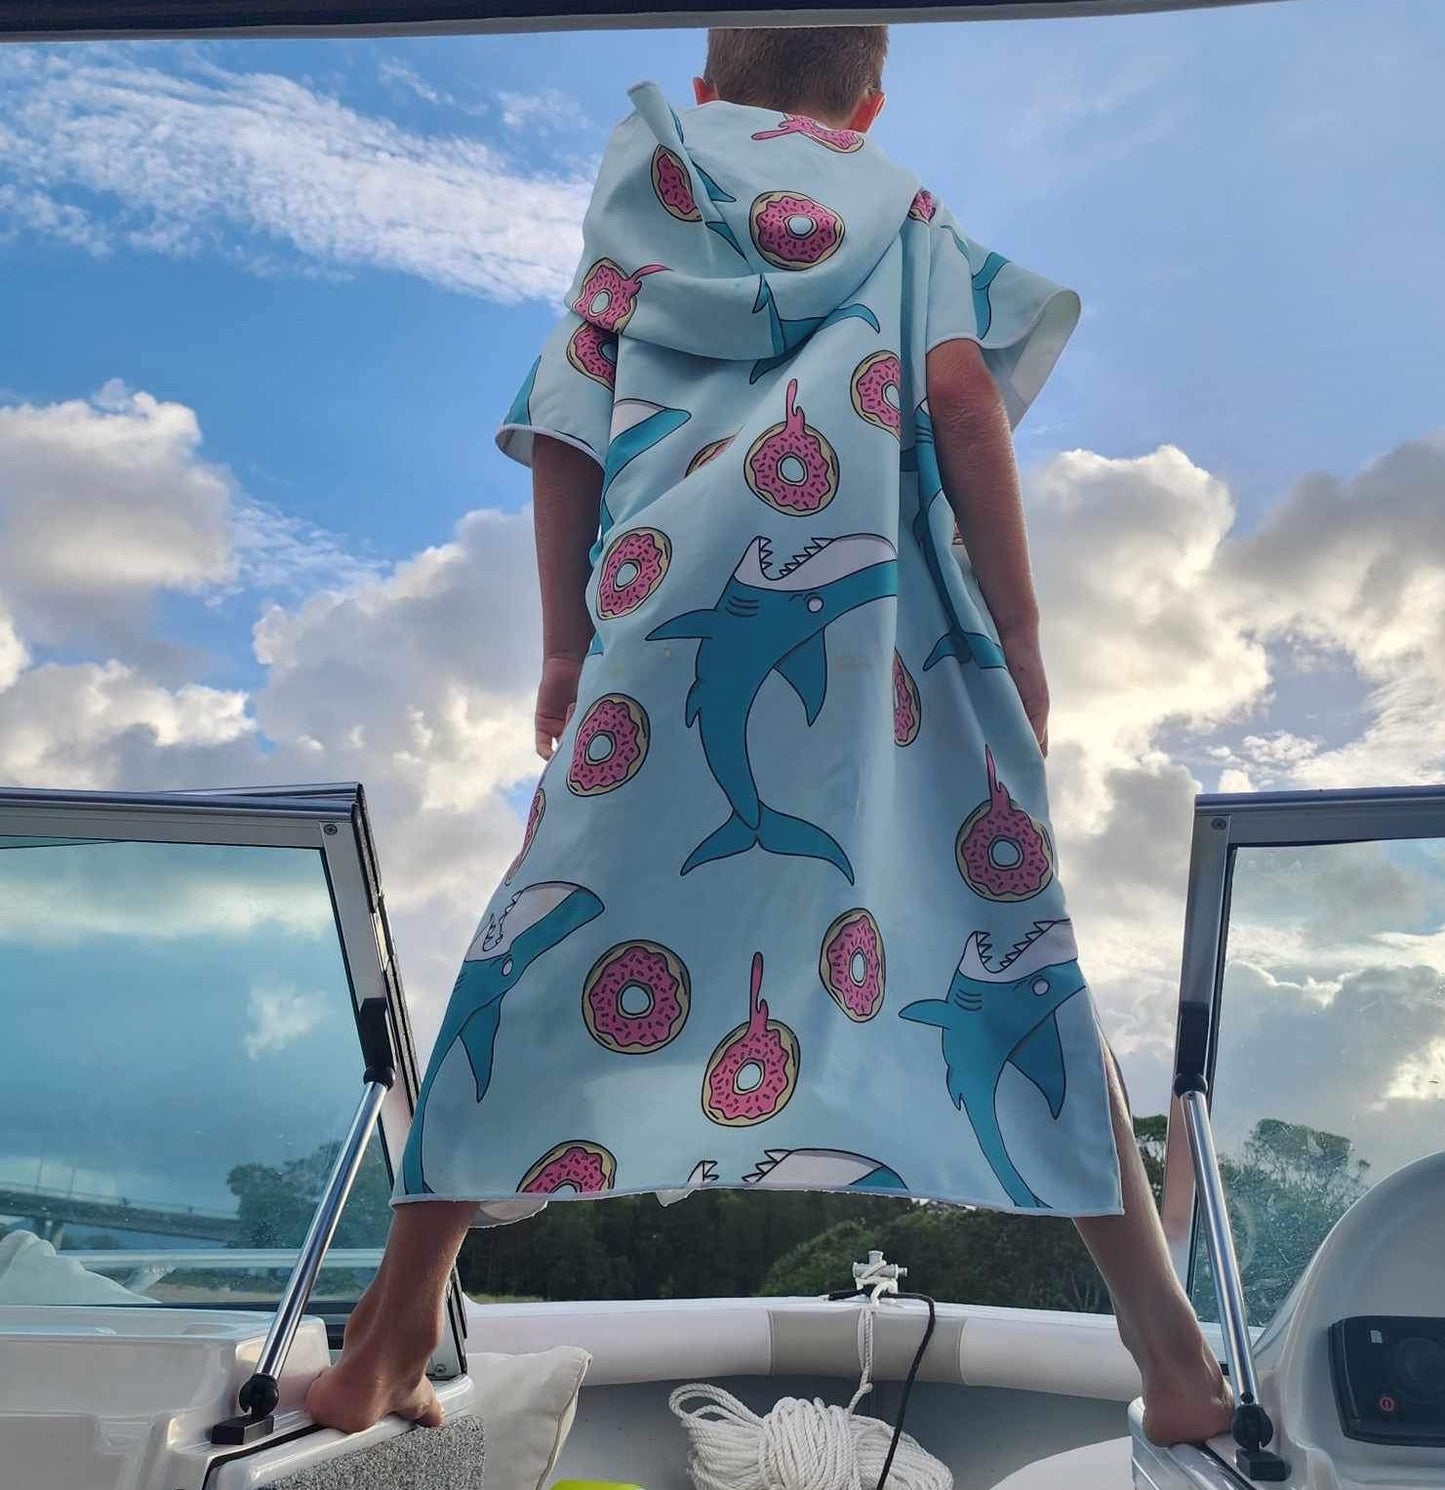 Boy (ages 6-12) wearing a Feeding Frenzy hooded beach towel. The design features a playful scene with colourful fish swimming around dripping donuts. He is standing excitedly on his dad's boat at Currumbin Beach, Queensland, ready for a fun day at beach.